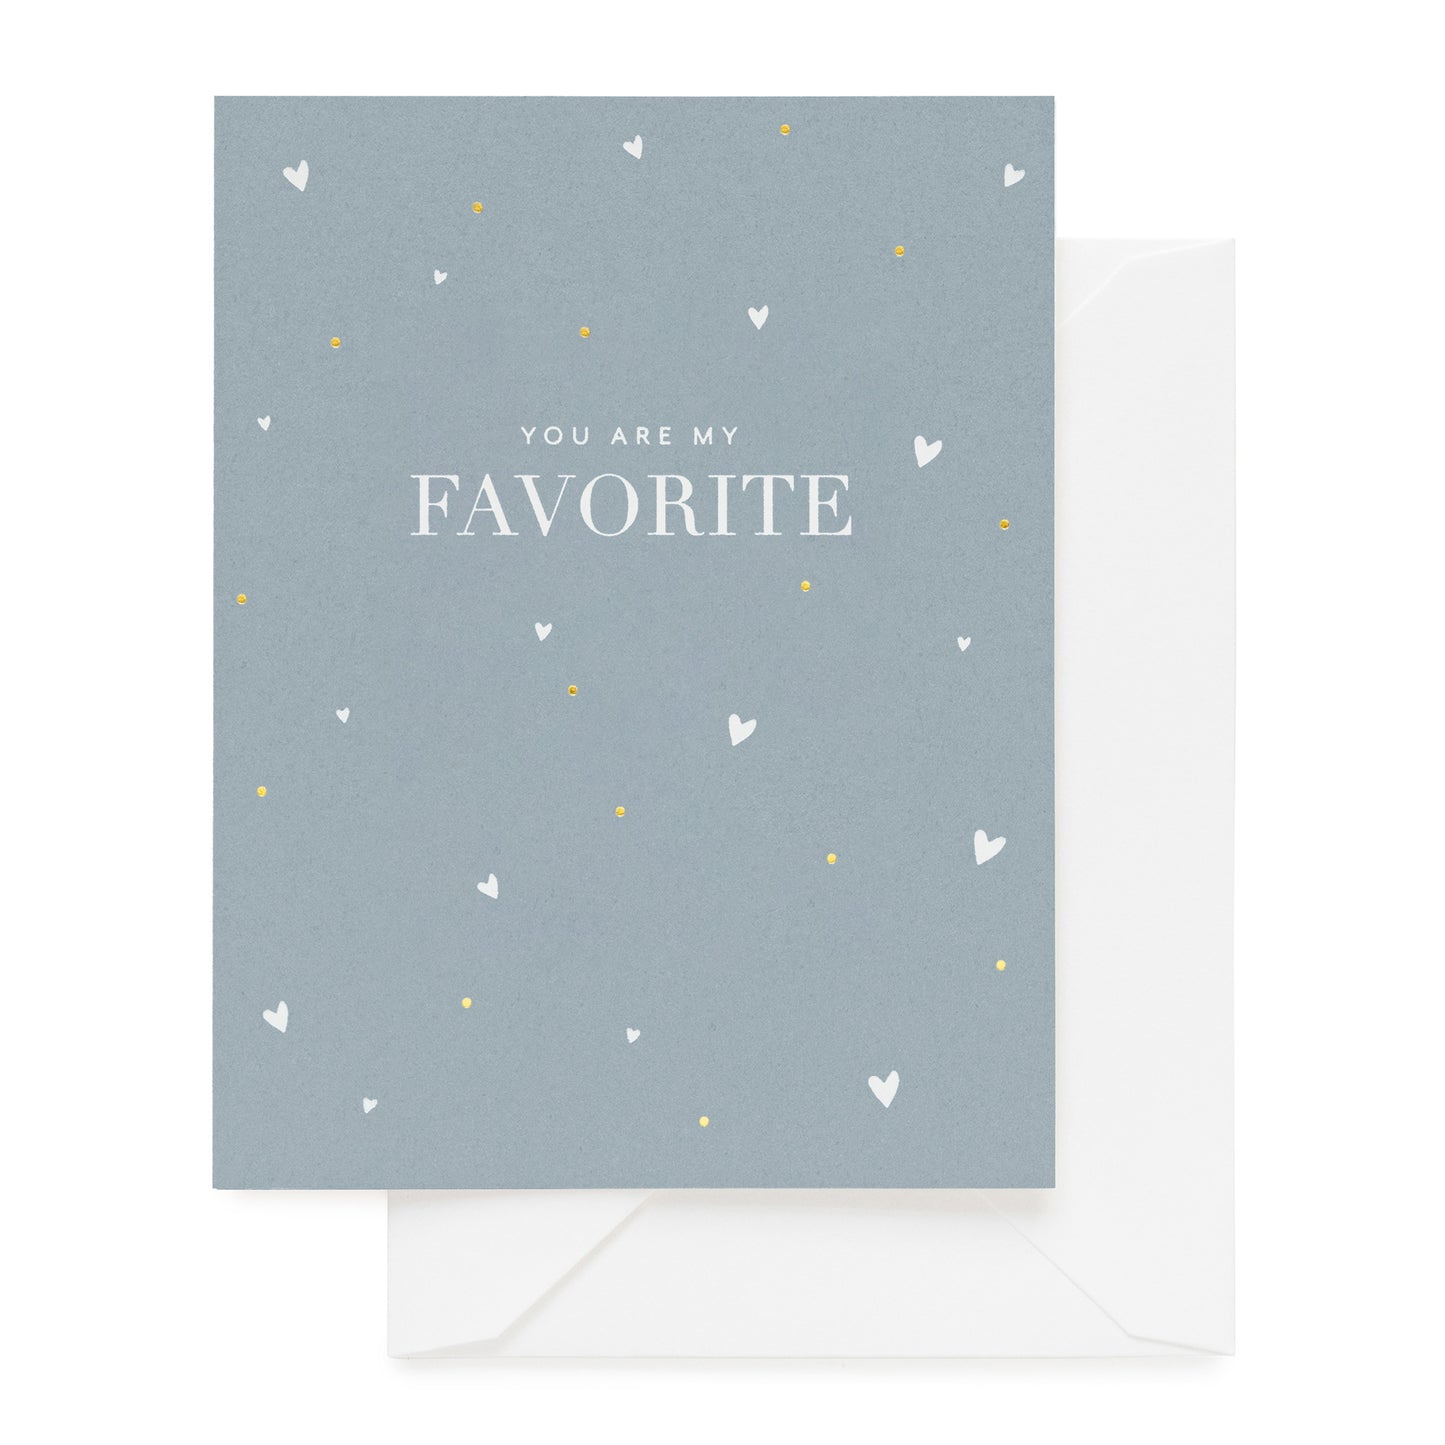 slate blue card with white text and gold accents, white envelope